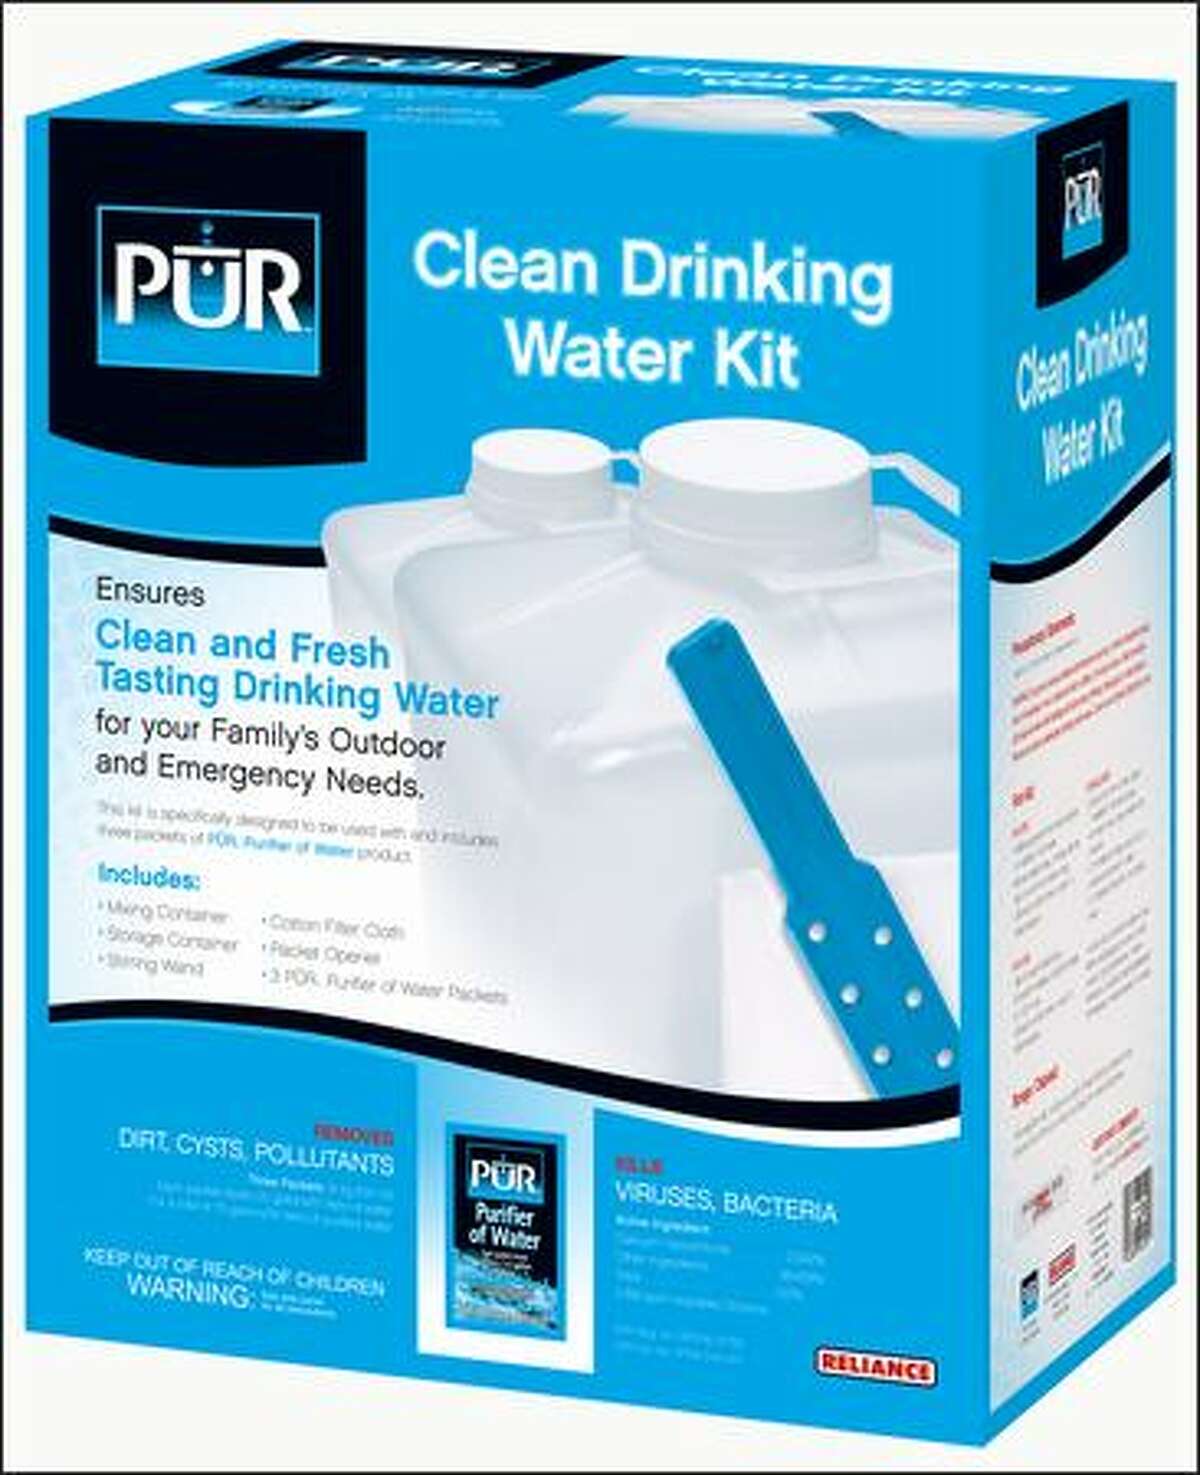 The technology in PUR's Purifier of Water is used in many water treatment plants - and now you can take it on the trail.